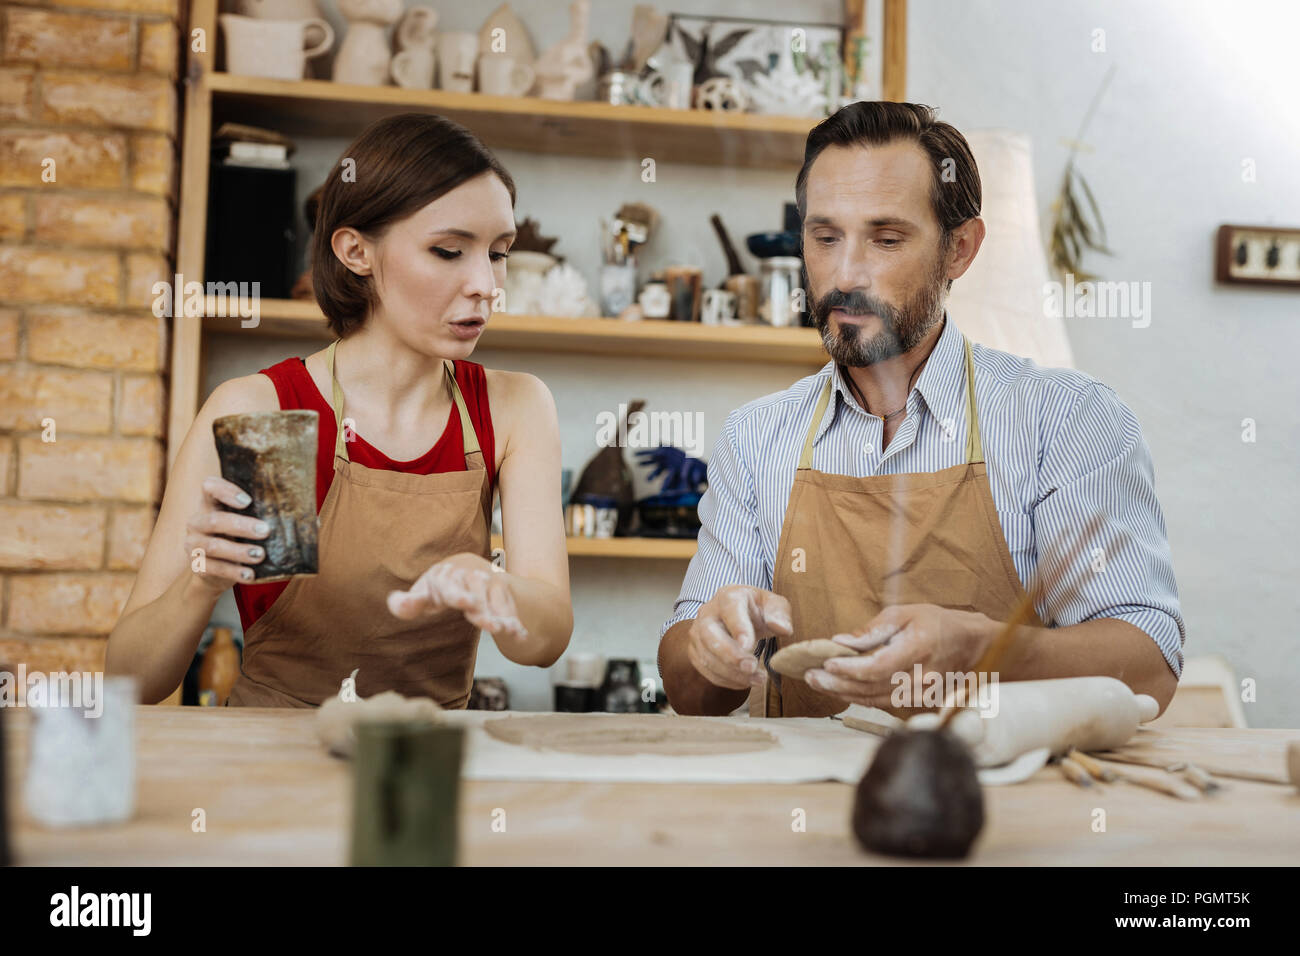 Dark-haired woman asking questions during ceramics master class Stock Photo